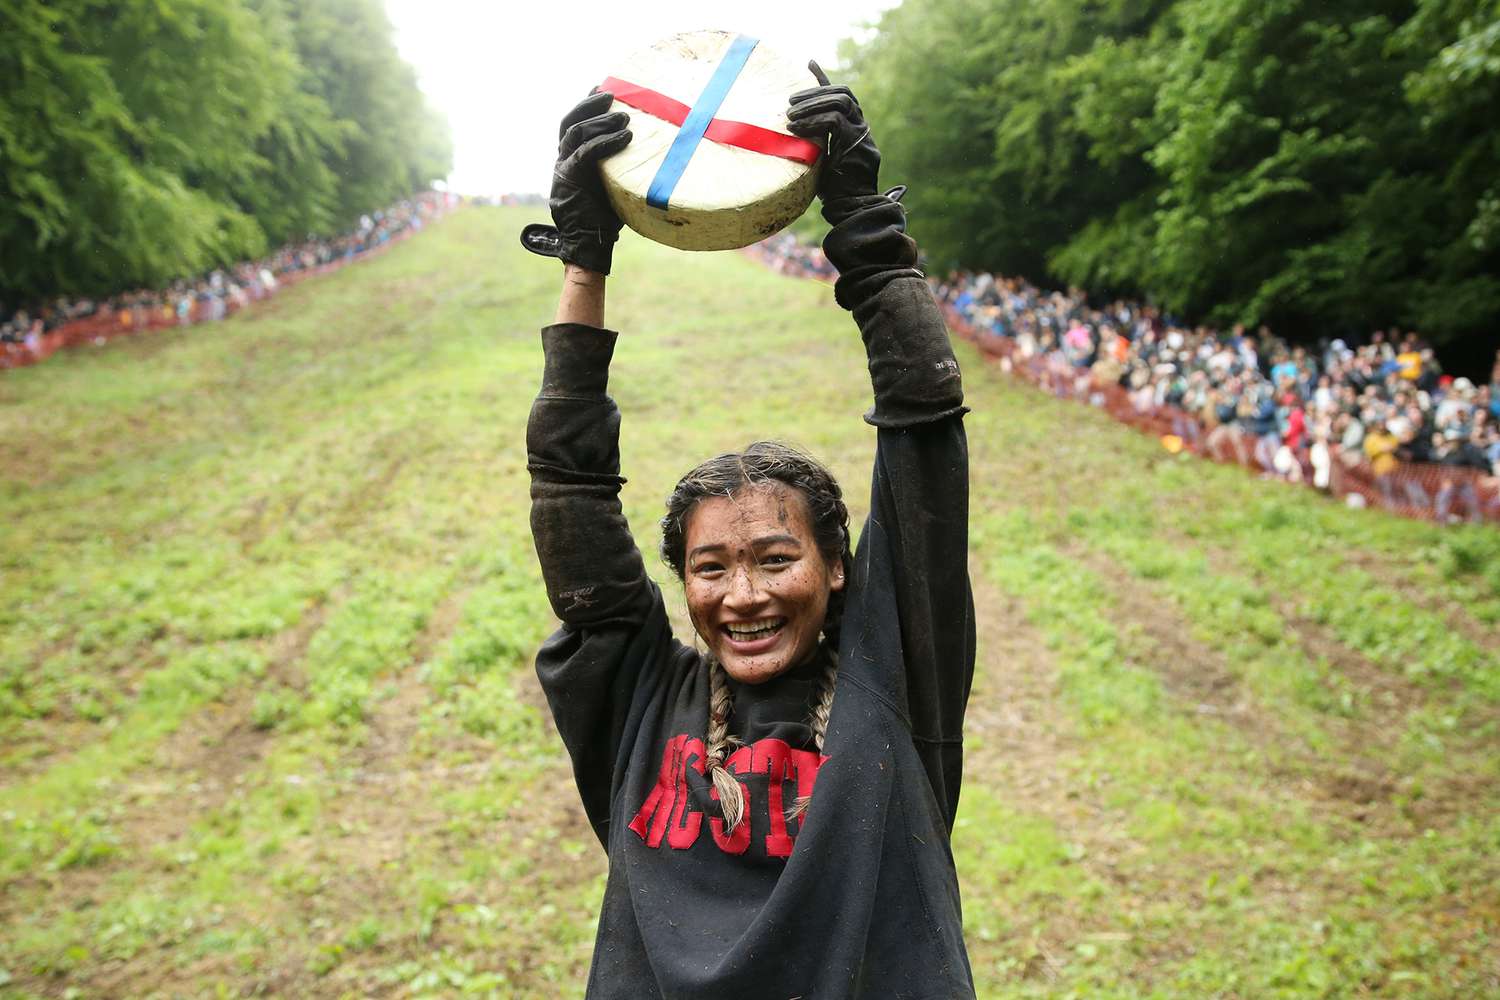 American Woman Wins British Cheese Rolling Event for First Time Ever